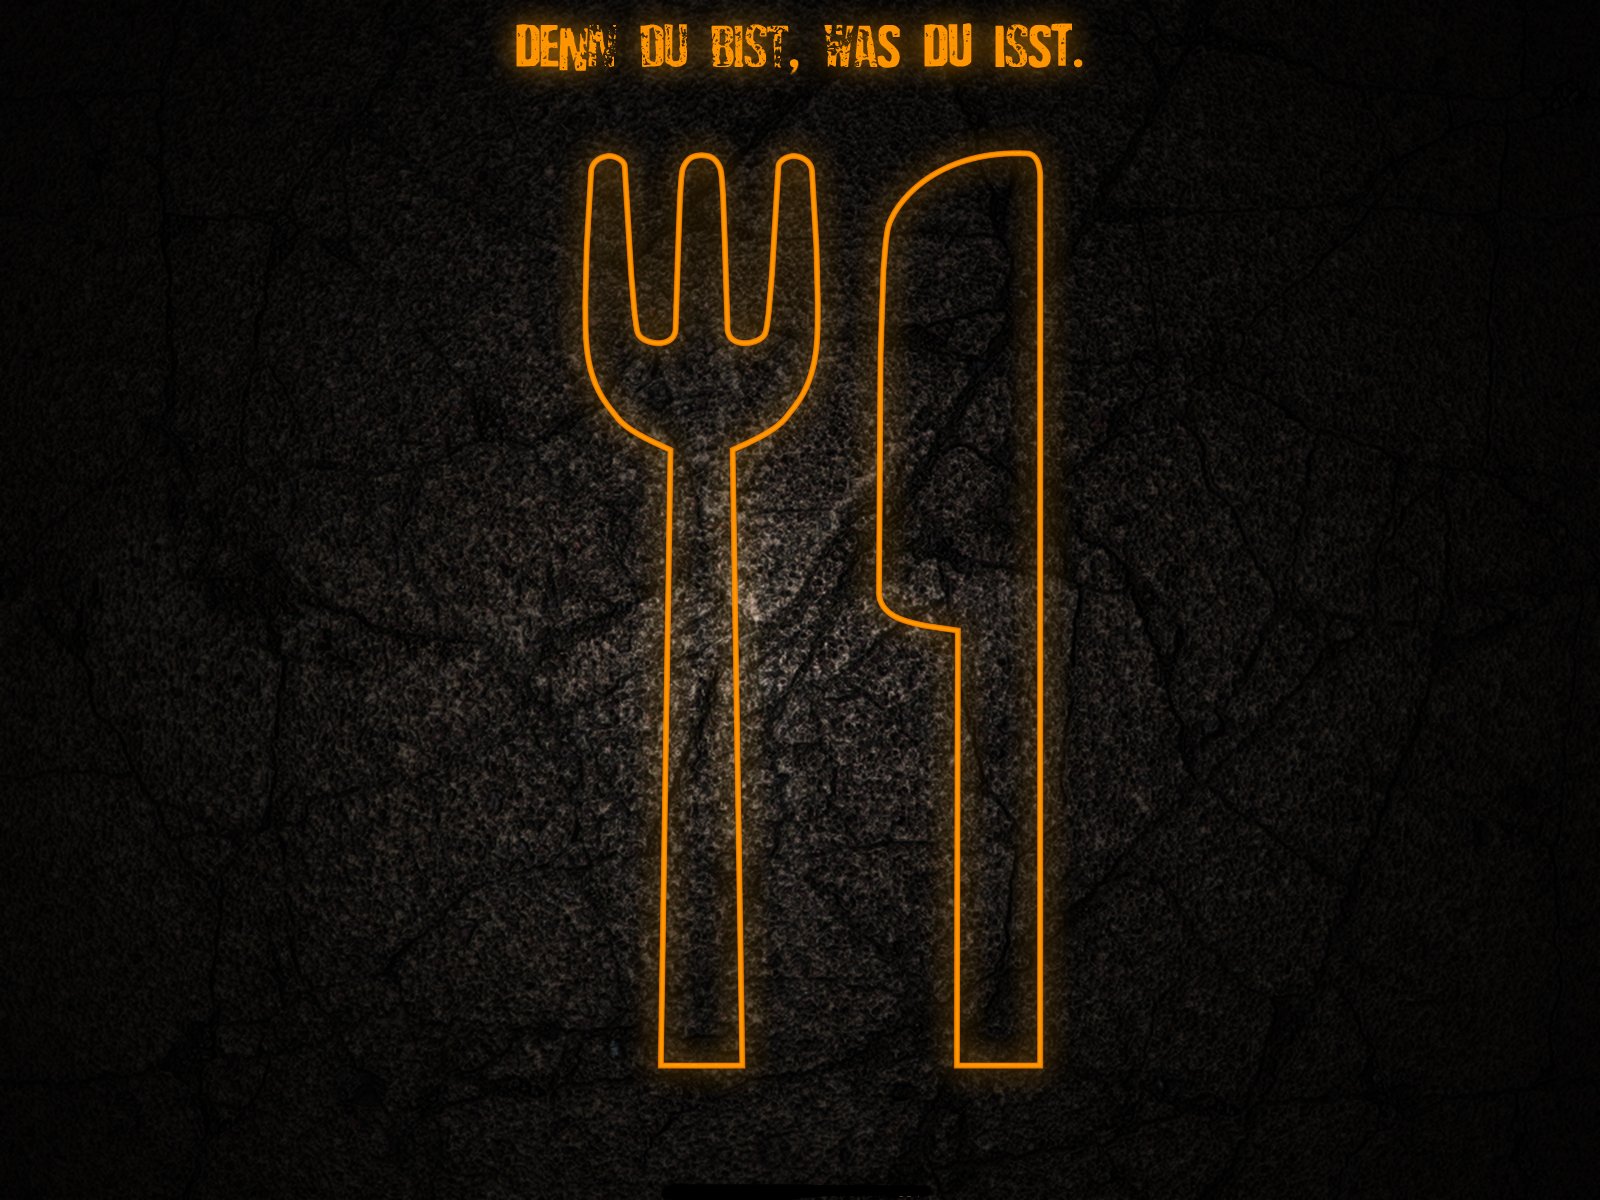 German fork and knife for 'Because you are what you eat' HD desktop wallpaper